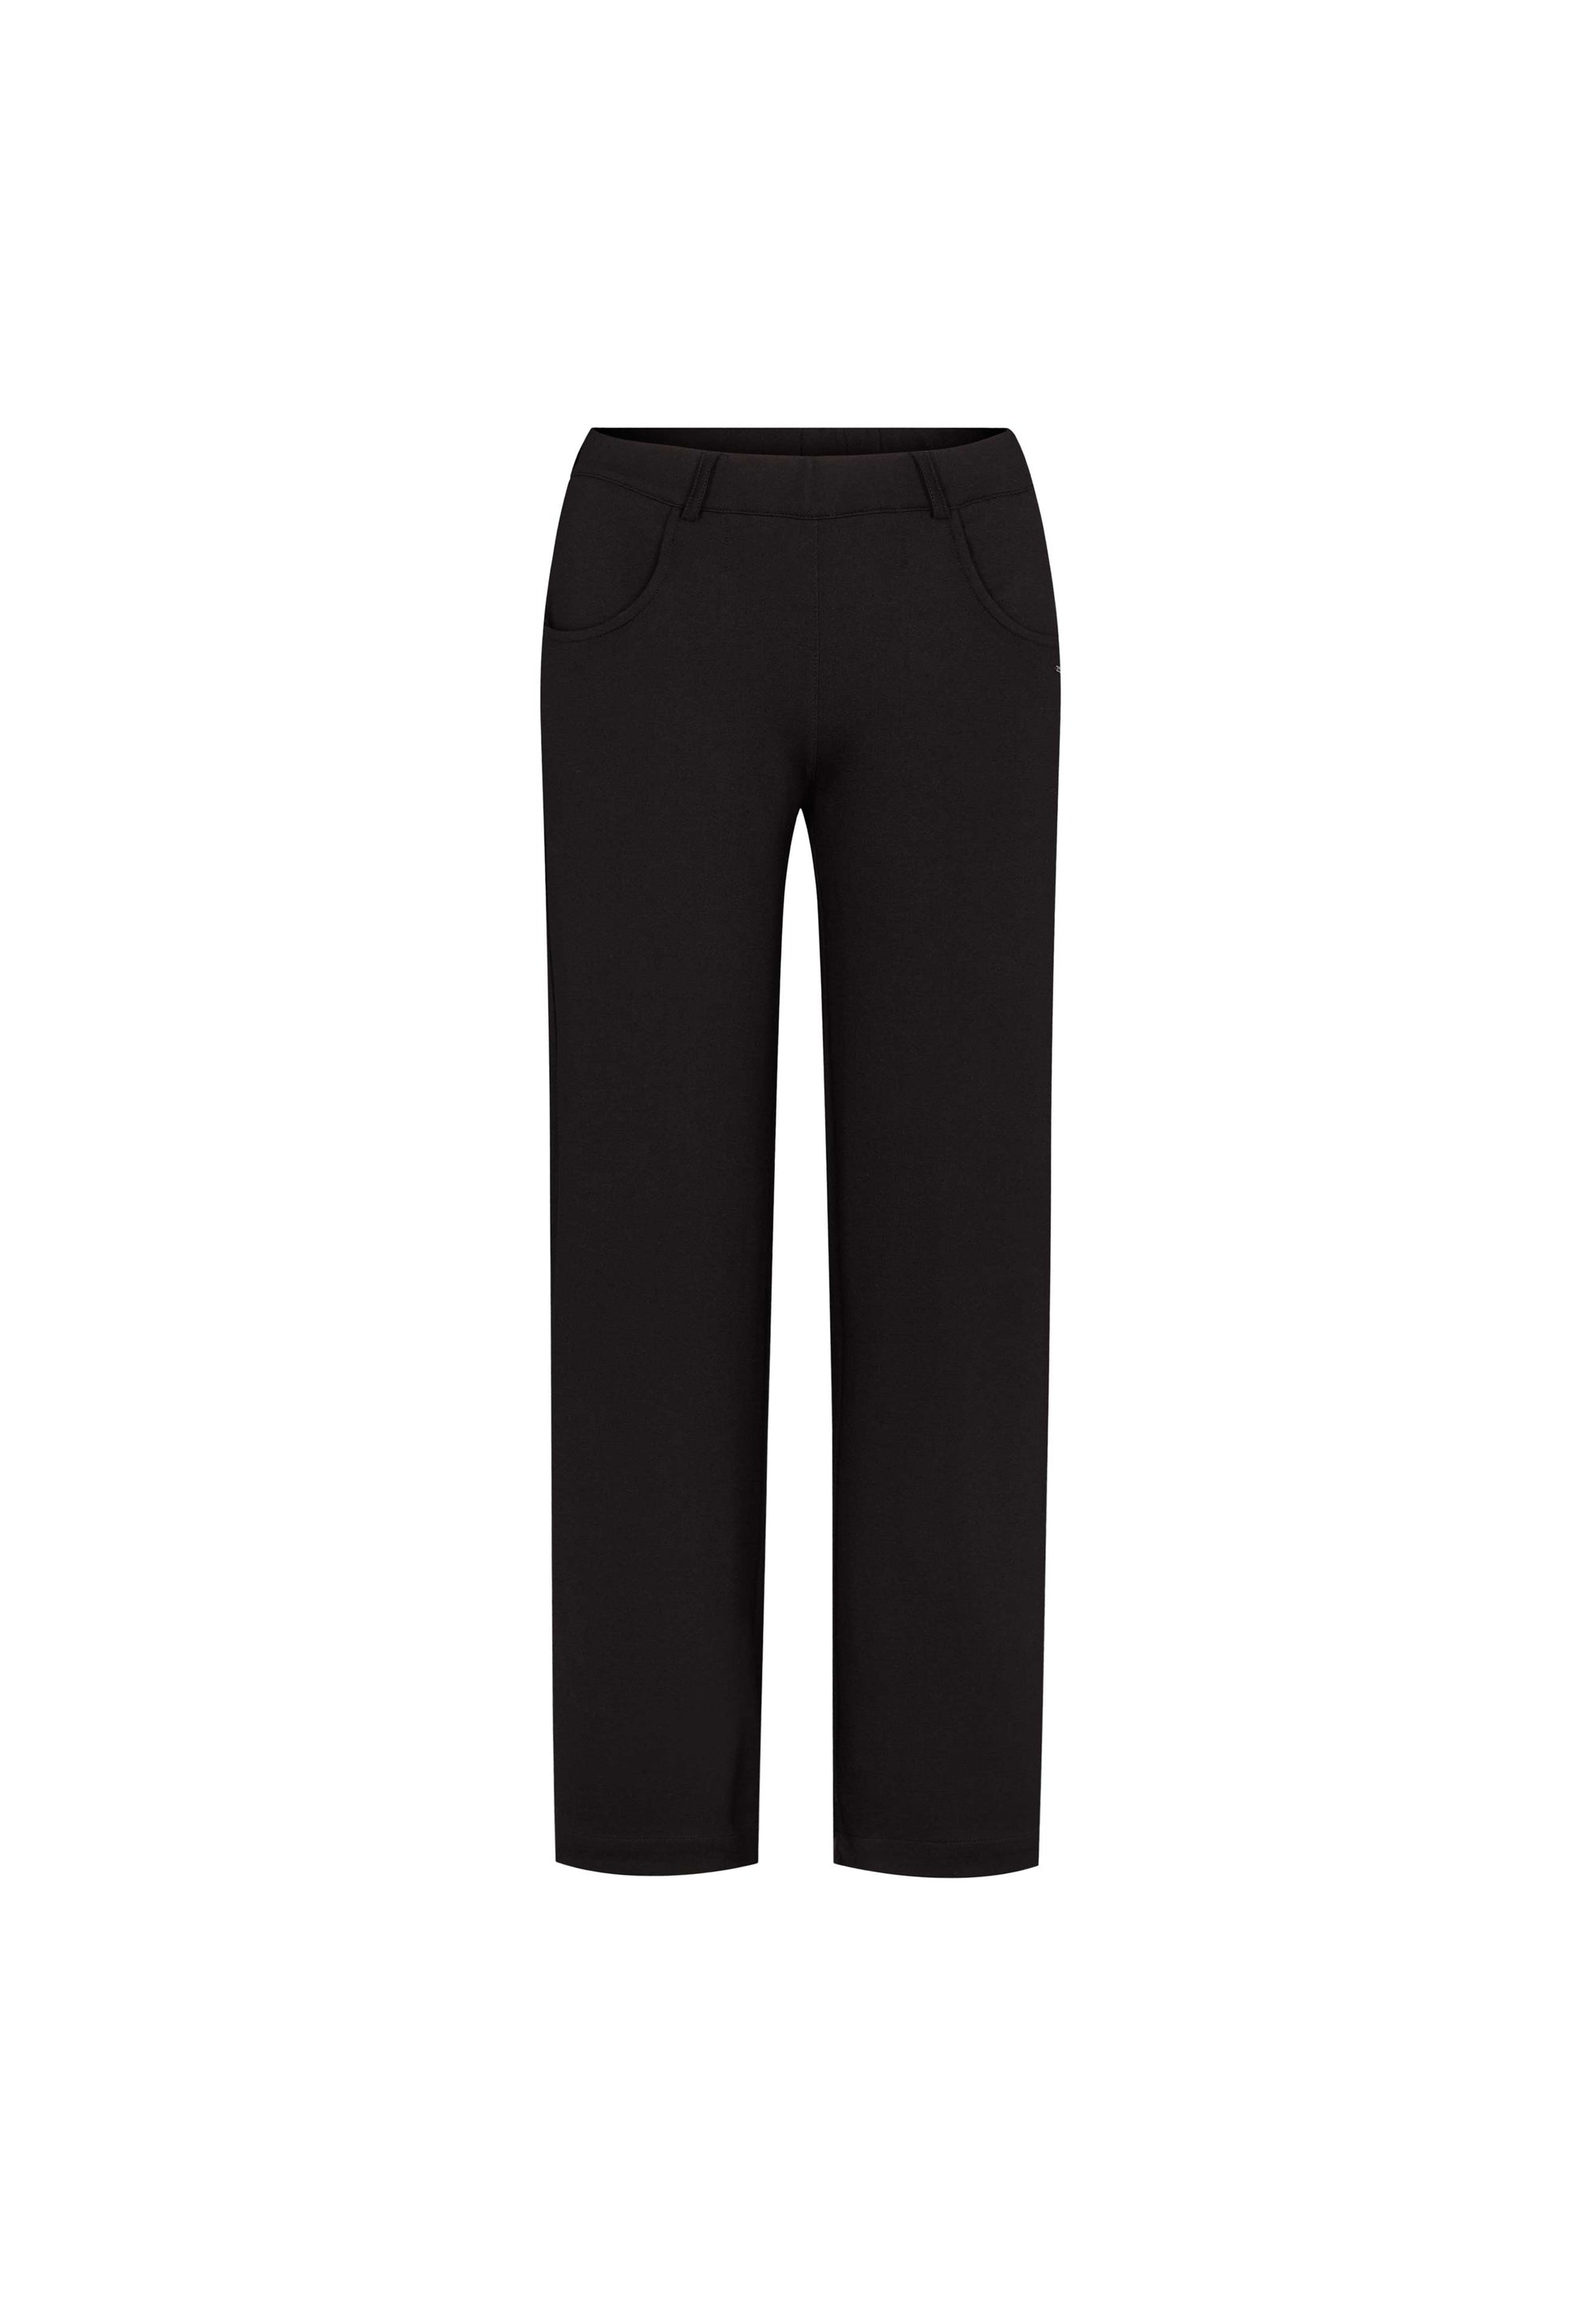 LAURIE  Donna Loose Jersey - Medium Length Trousers LOOSE 99147 Black